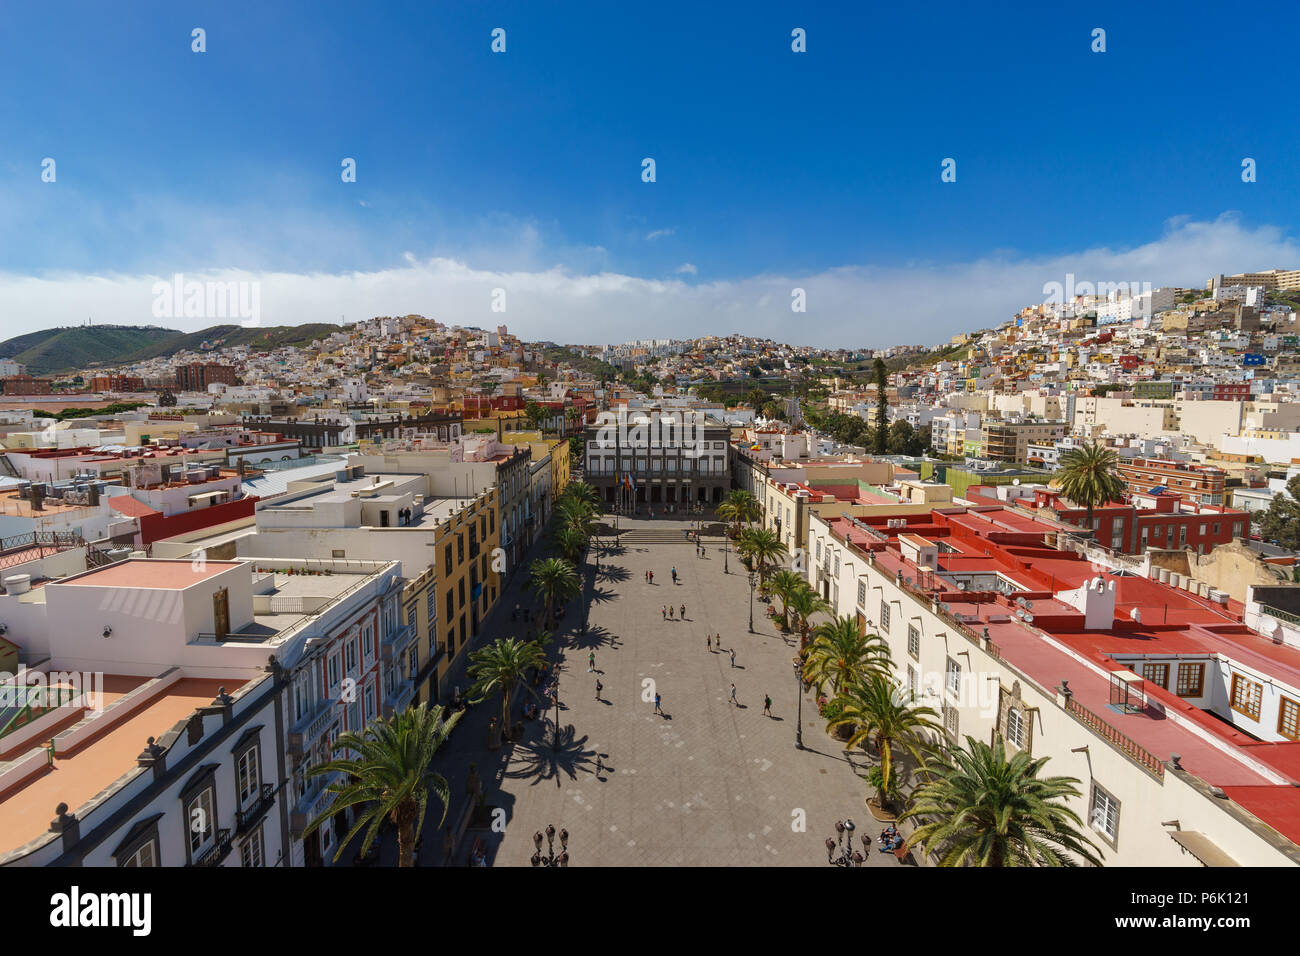 Panoramic view on Plaza Mayor of Santa Ana and colorful residential structures of Las Palmas city, Gran Canaria, Canary islands, Spain Stock Photo